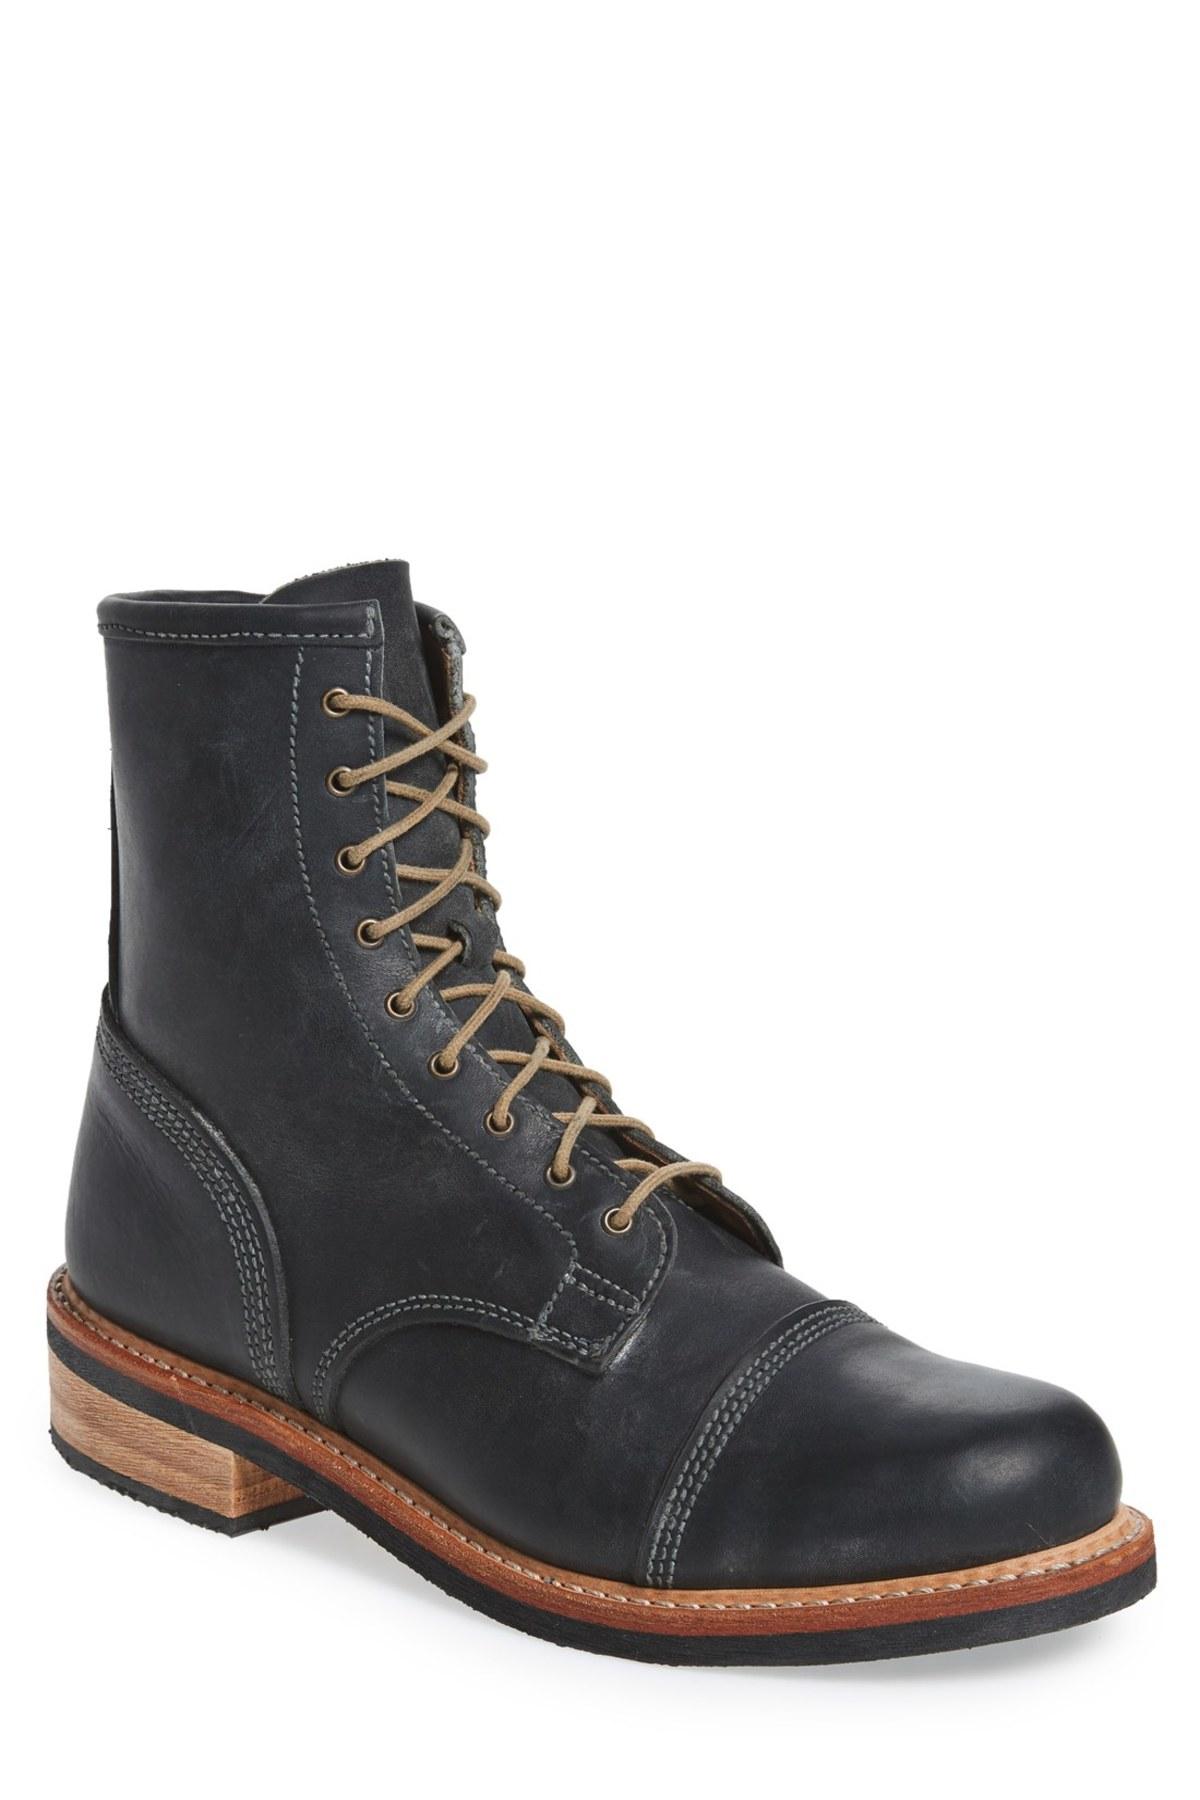 Timberland Leather Smugglers Cap Toe Boot in Black for Men - Lyst